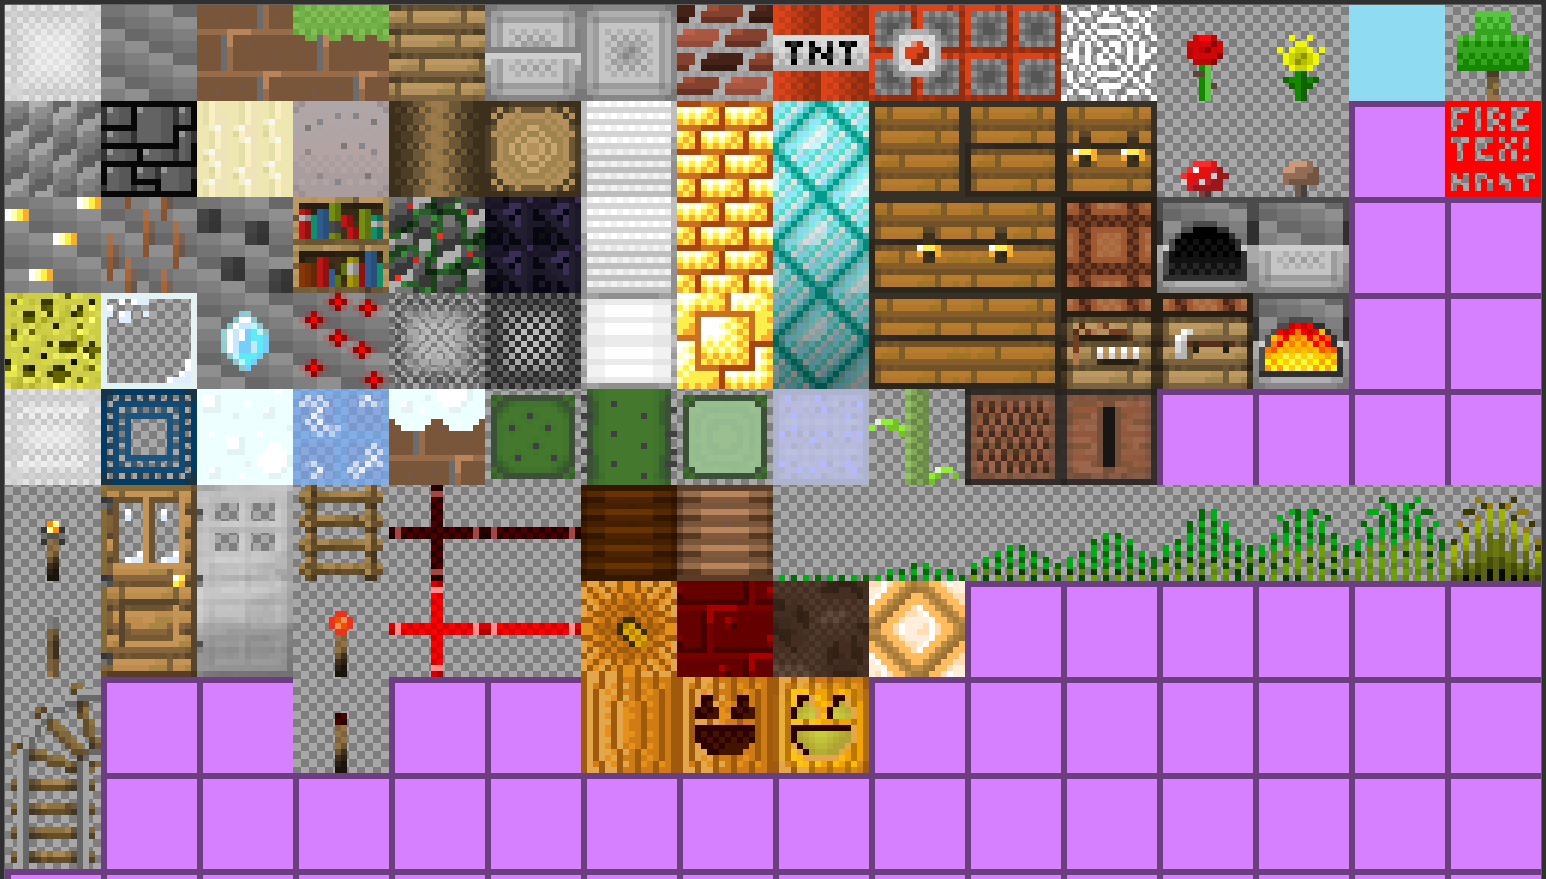 The terrain.png image showing all the block textures!